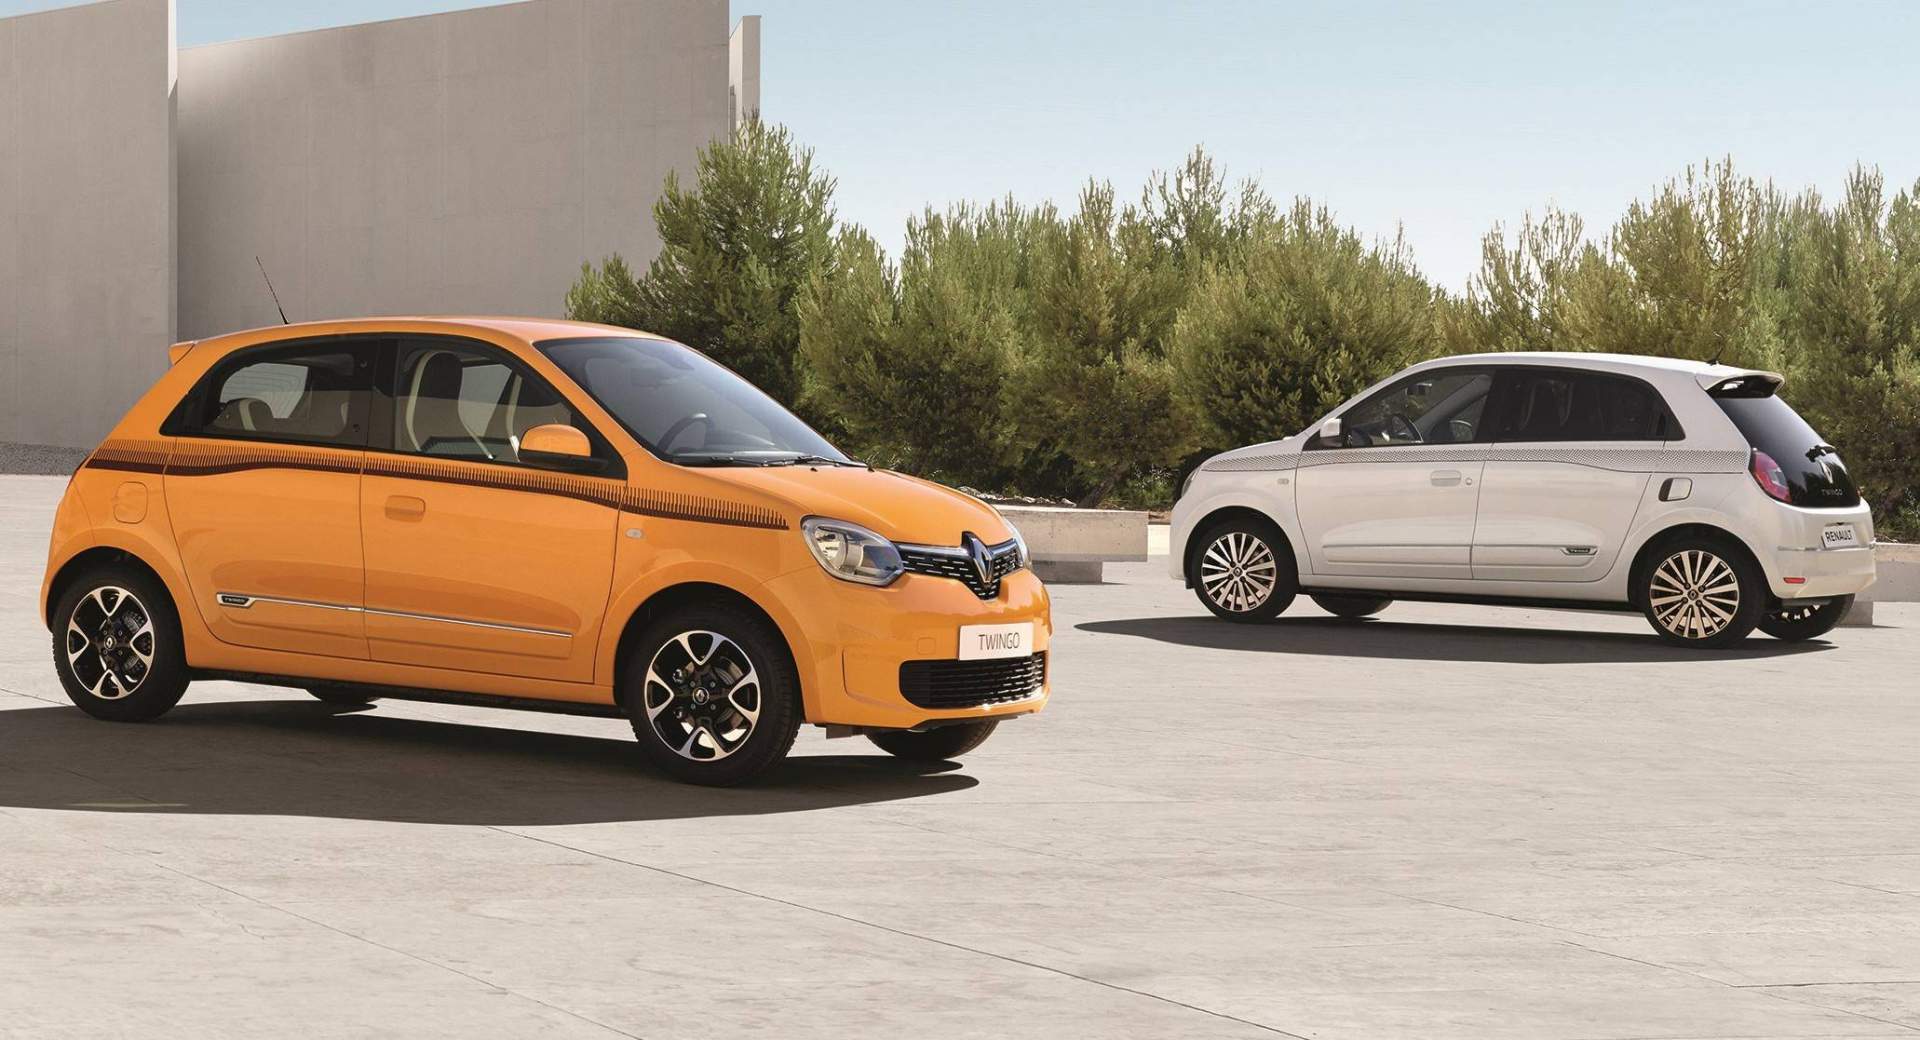 Facelifted Renault Twingo Won't Make It To The United Kingdom